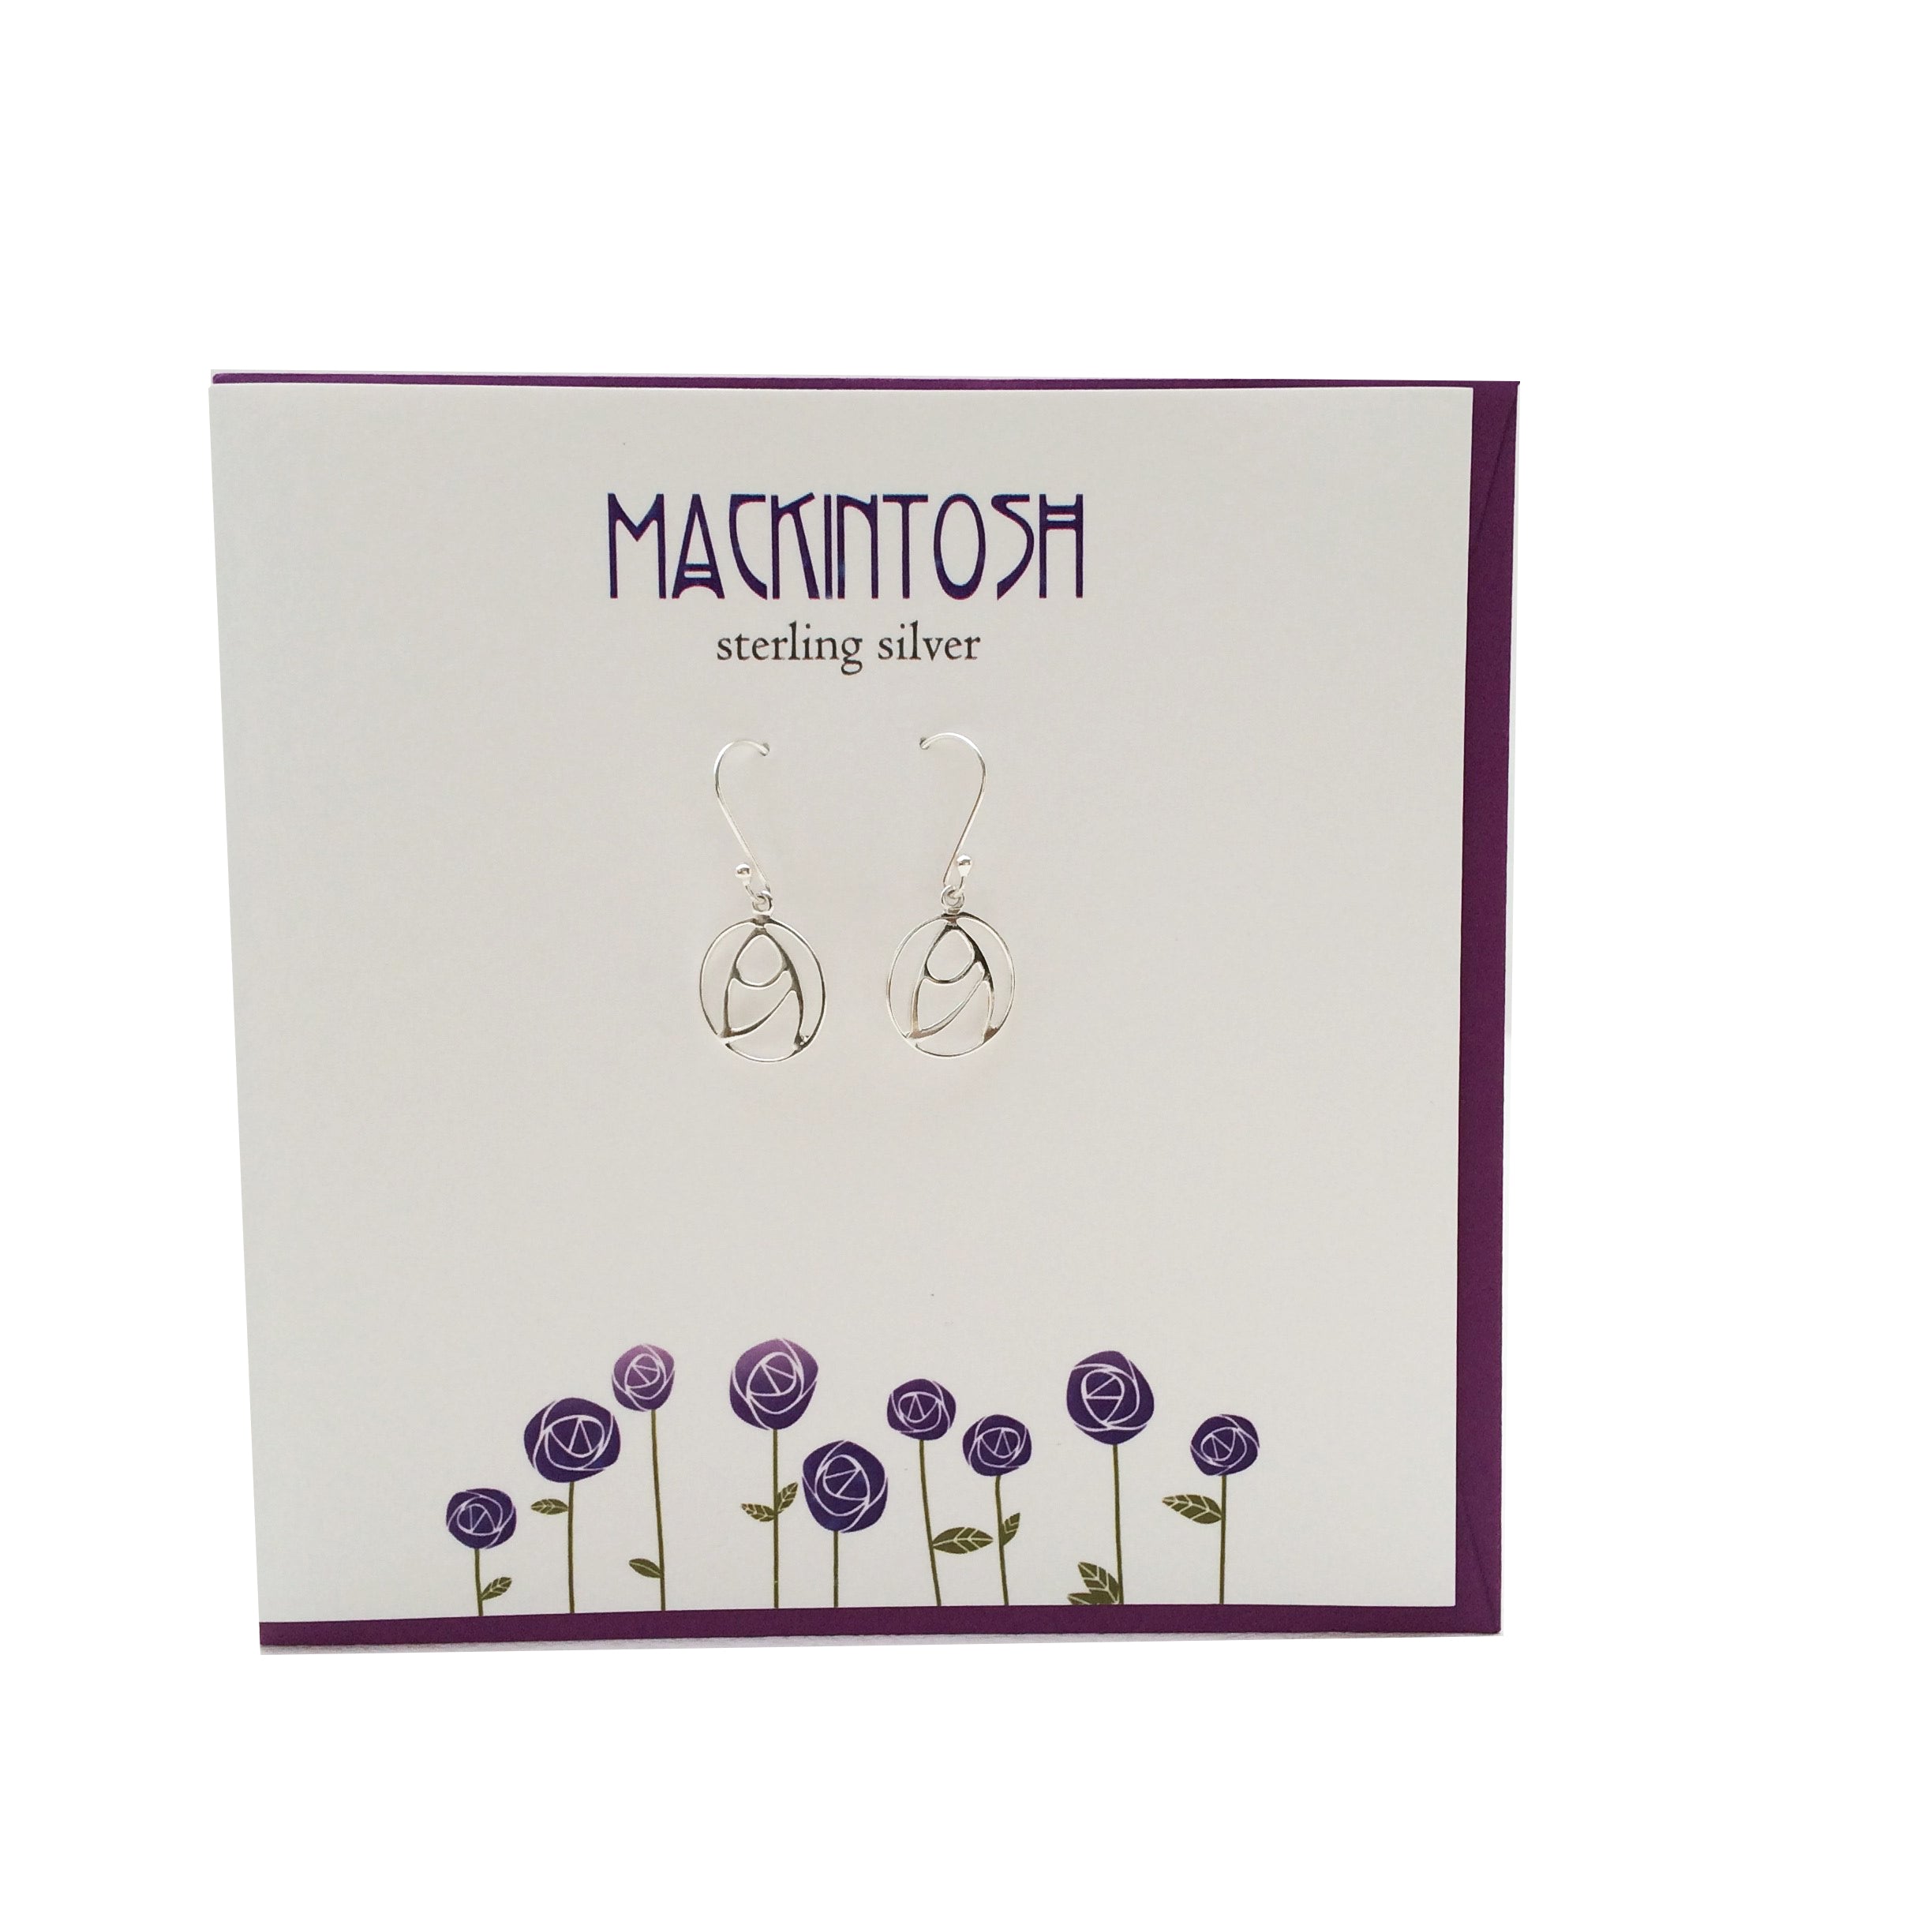 Rennie Mackintosh Inspired Scottish Rose silver earrings | The Silver